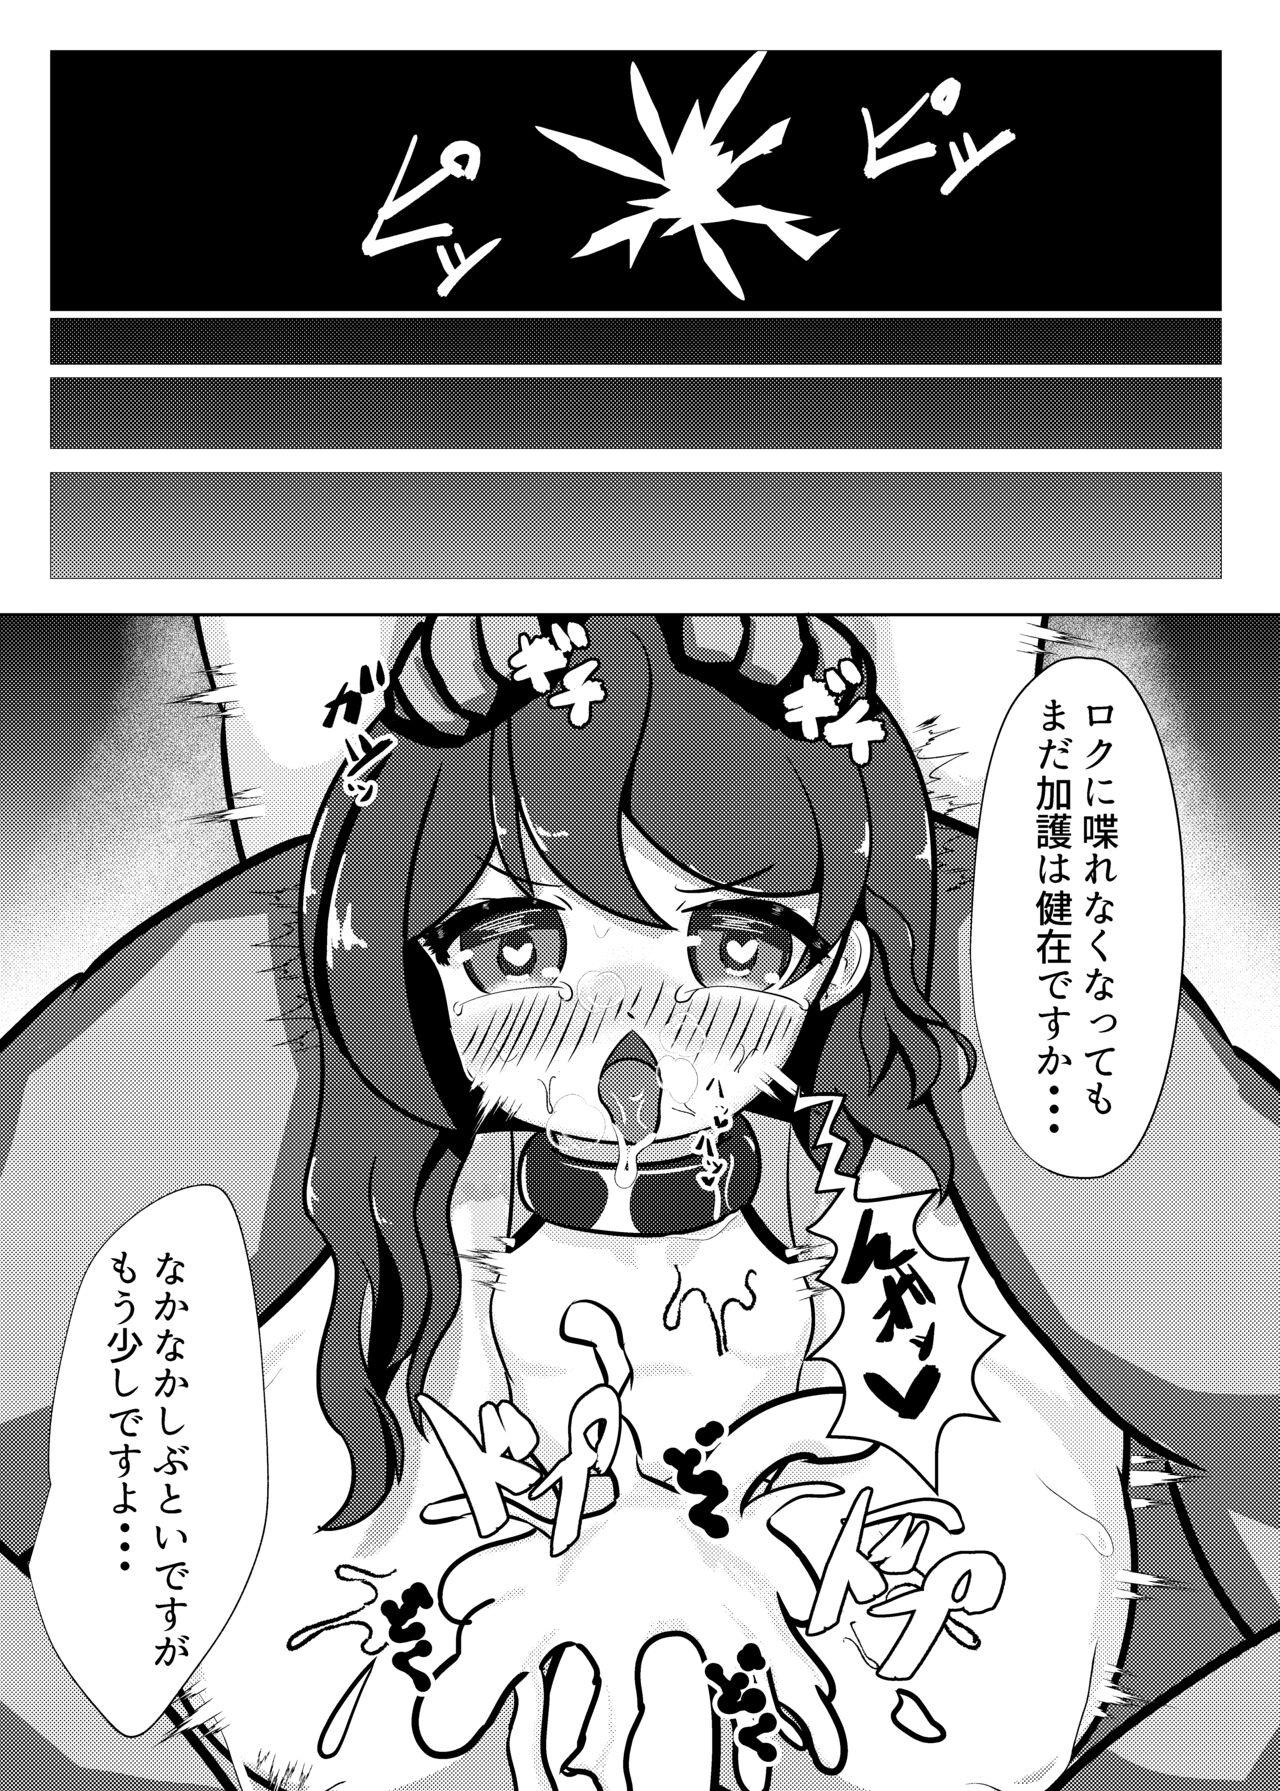 Head ヒギリちゃんがひどいめにあう本 蟲教強制改宗悪堕ち編 - Flower knight girl Oral Sex Porn - Page 11